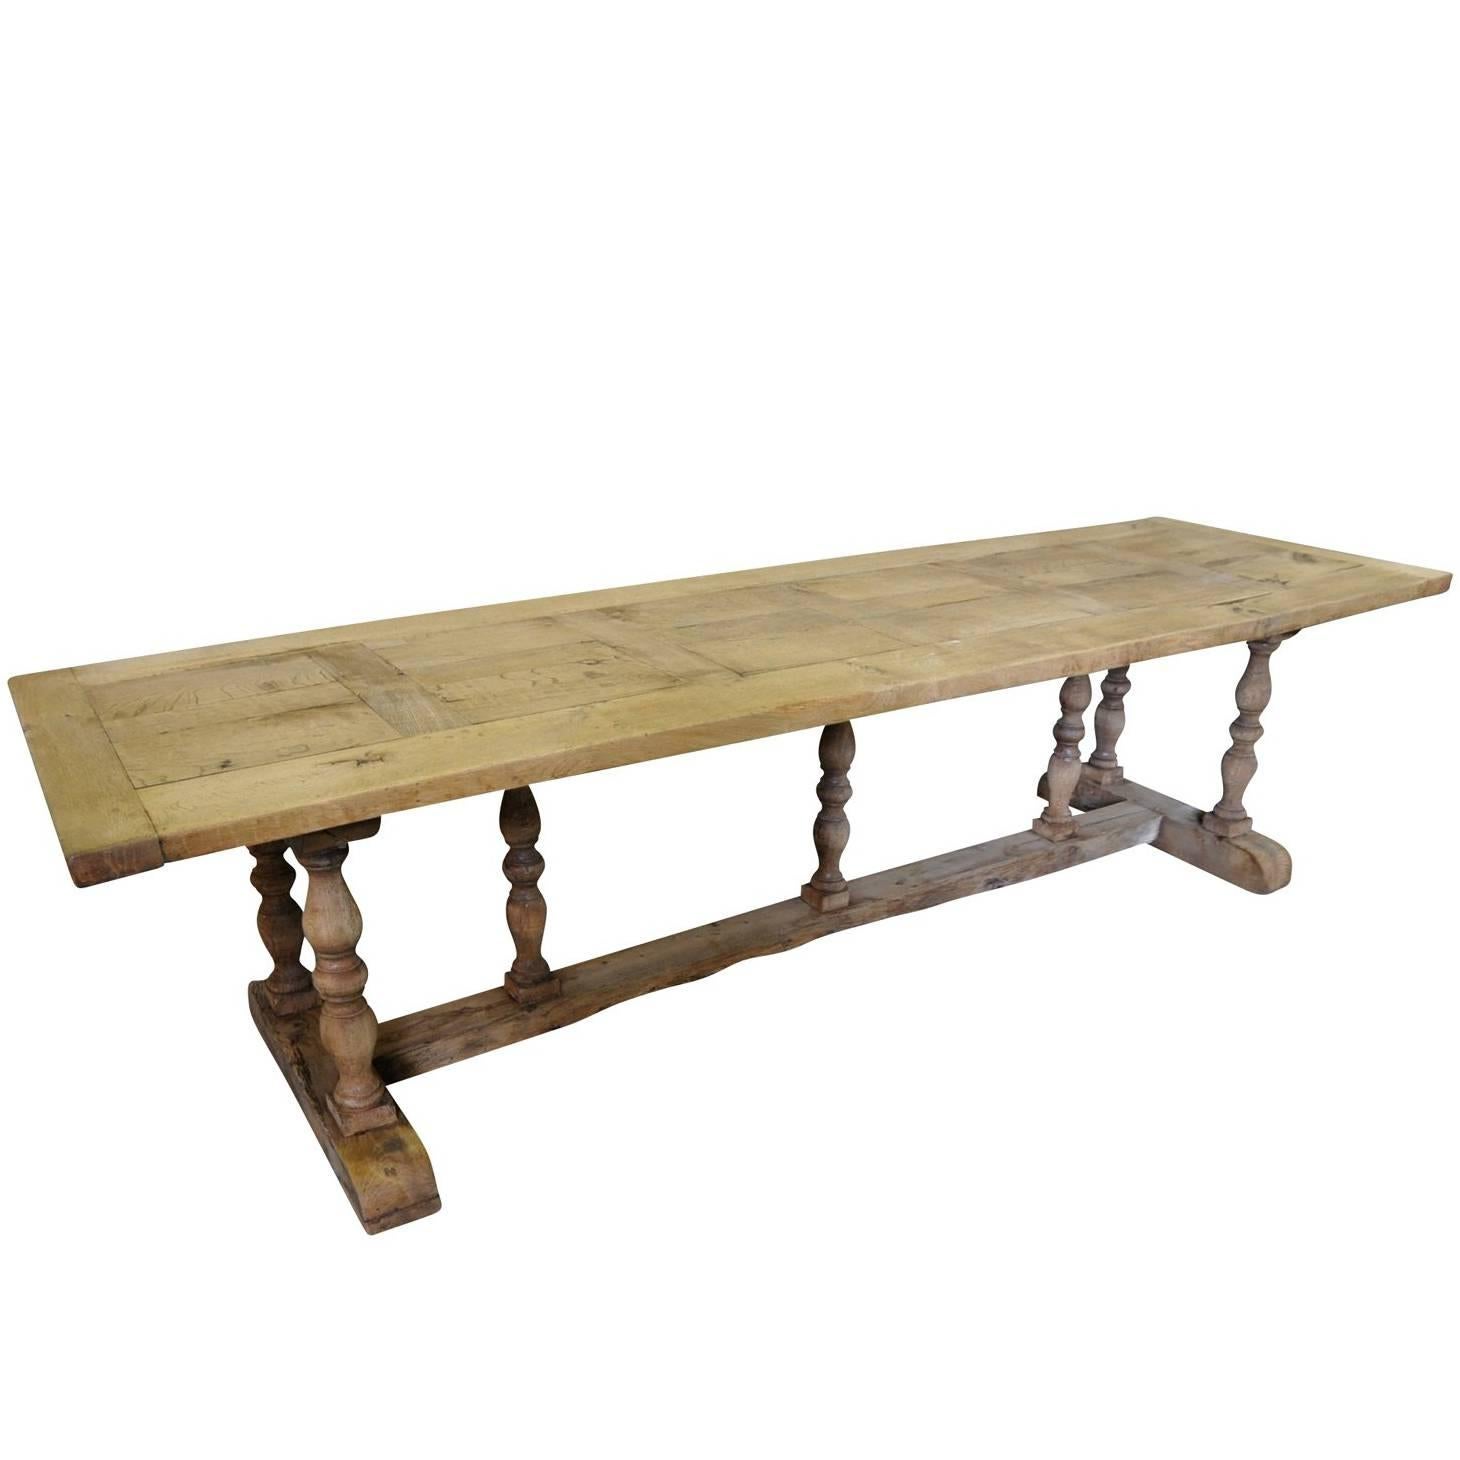 French Farm Table, Trestle Table, 19th Century